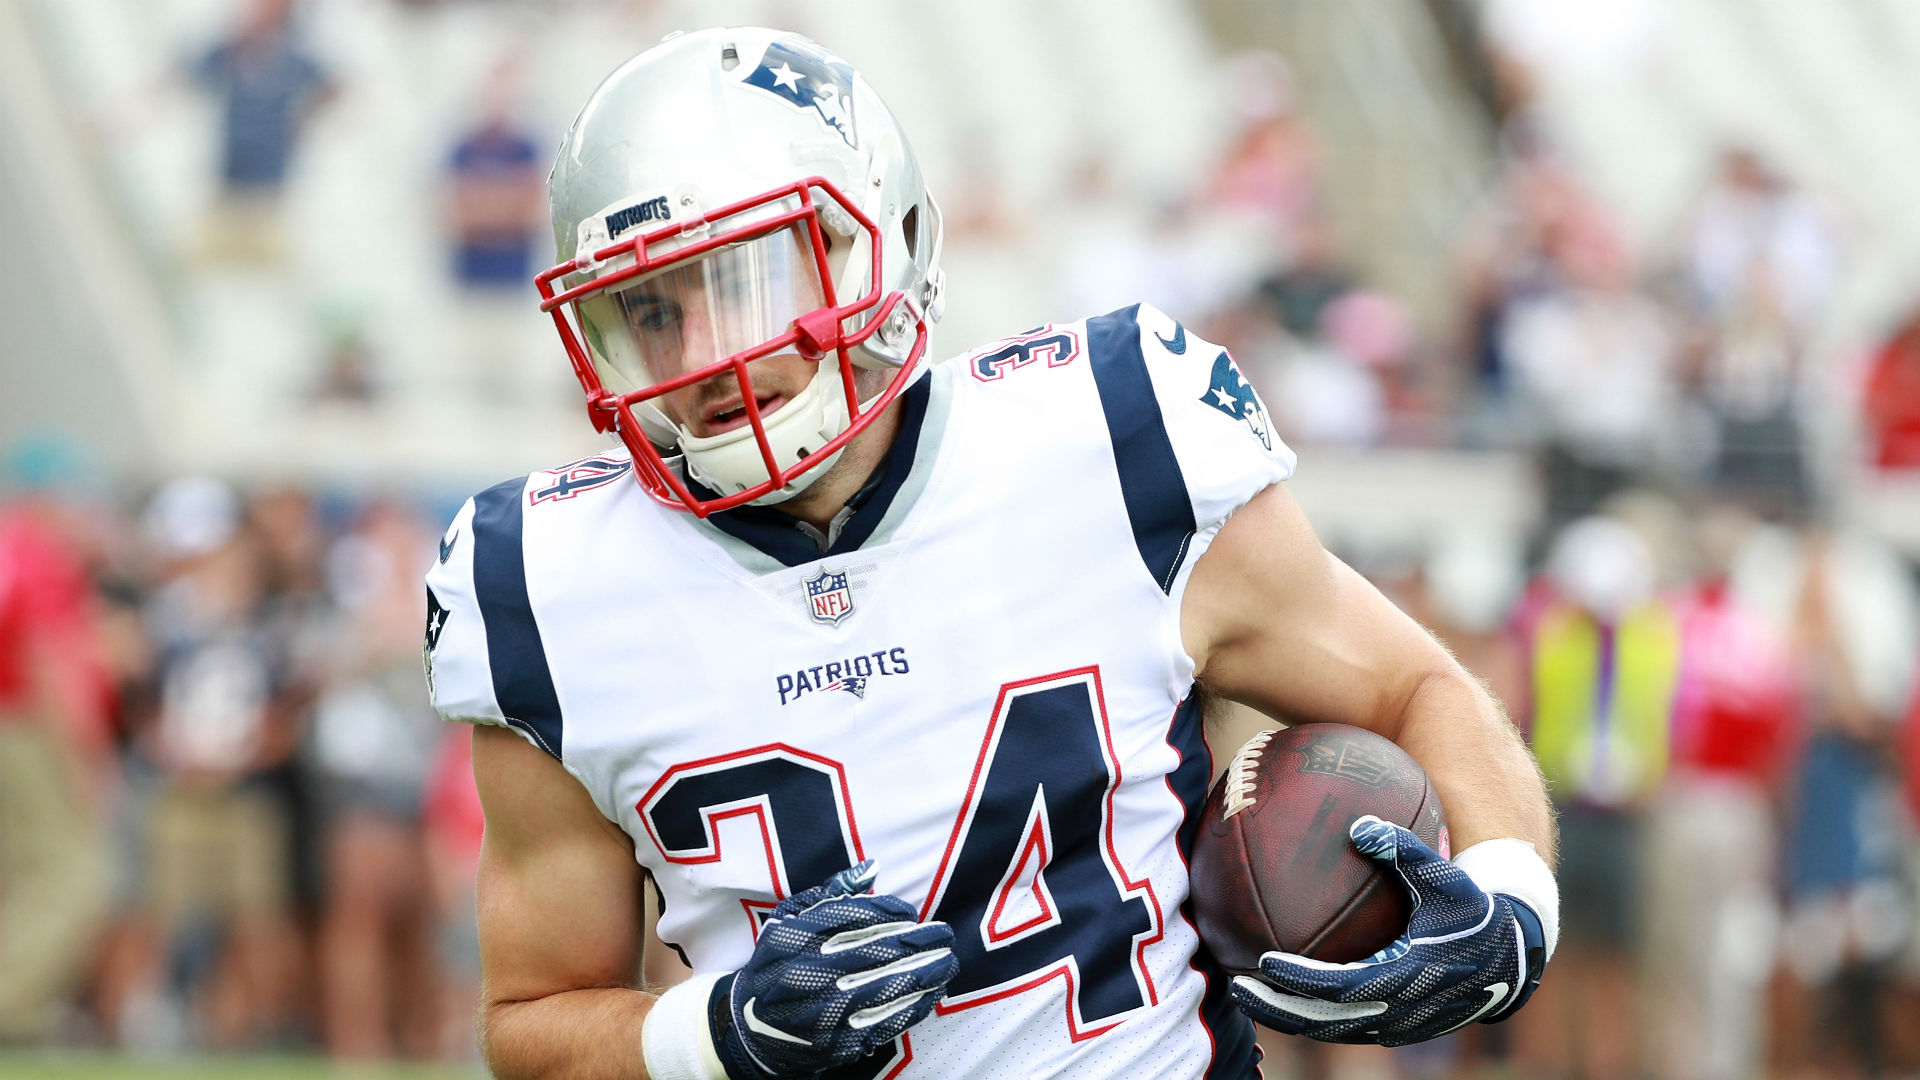 Patriots injury updates: Rex Burkhead, Patrick Chung ruled out for Week 5